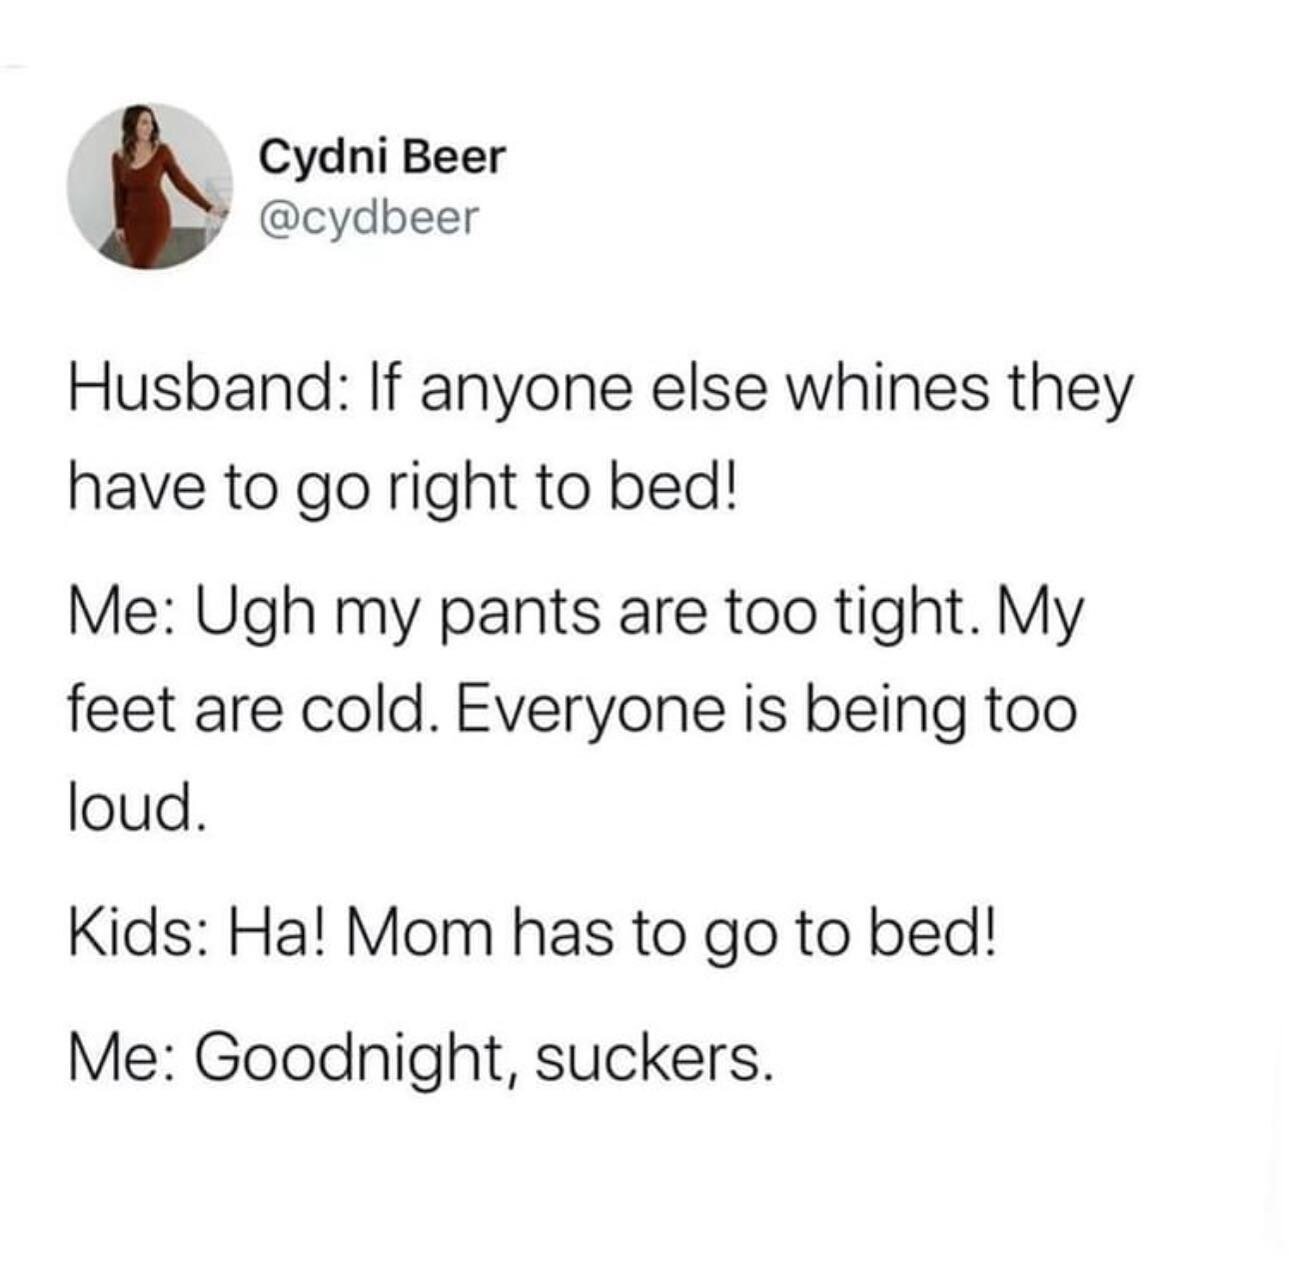 Now that&rsquo;s a genius move! #socalmoms #momlife

p.c. @naturalpatch via @cydbeer